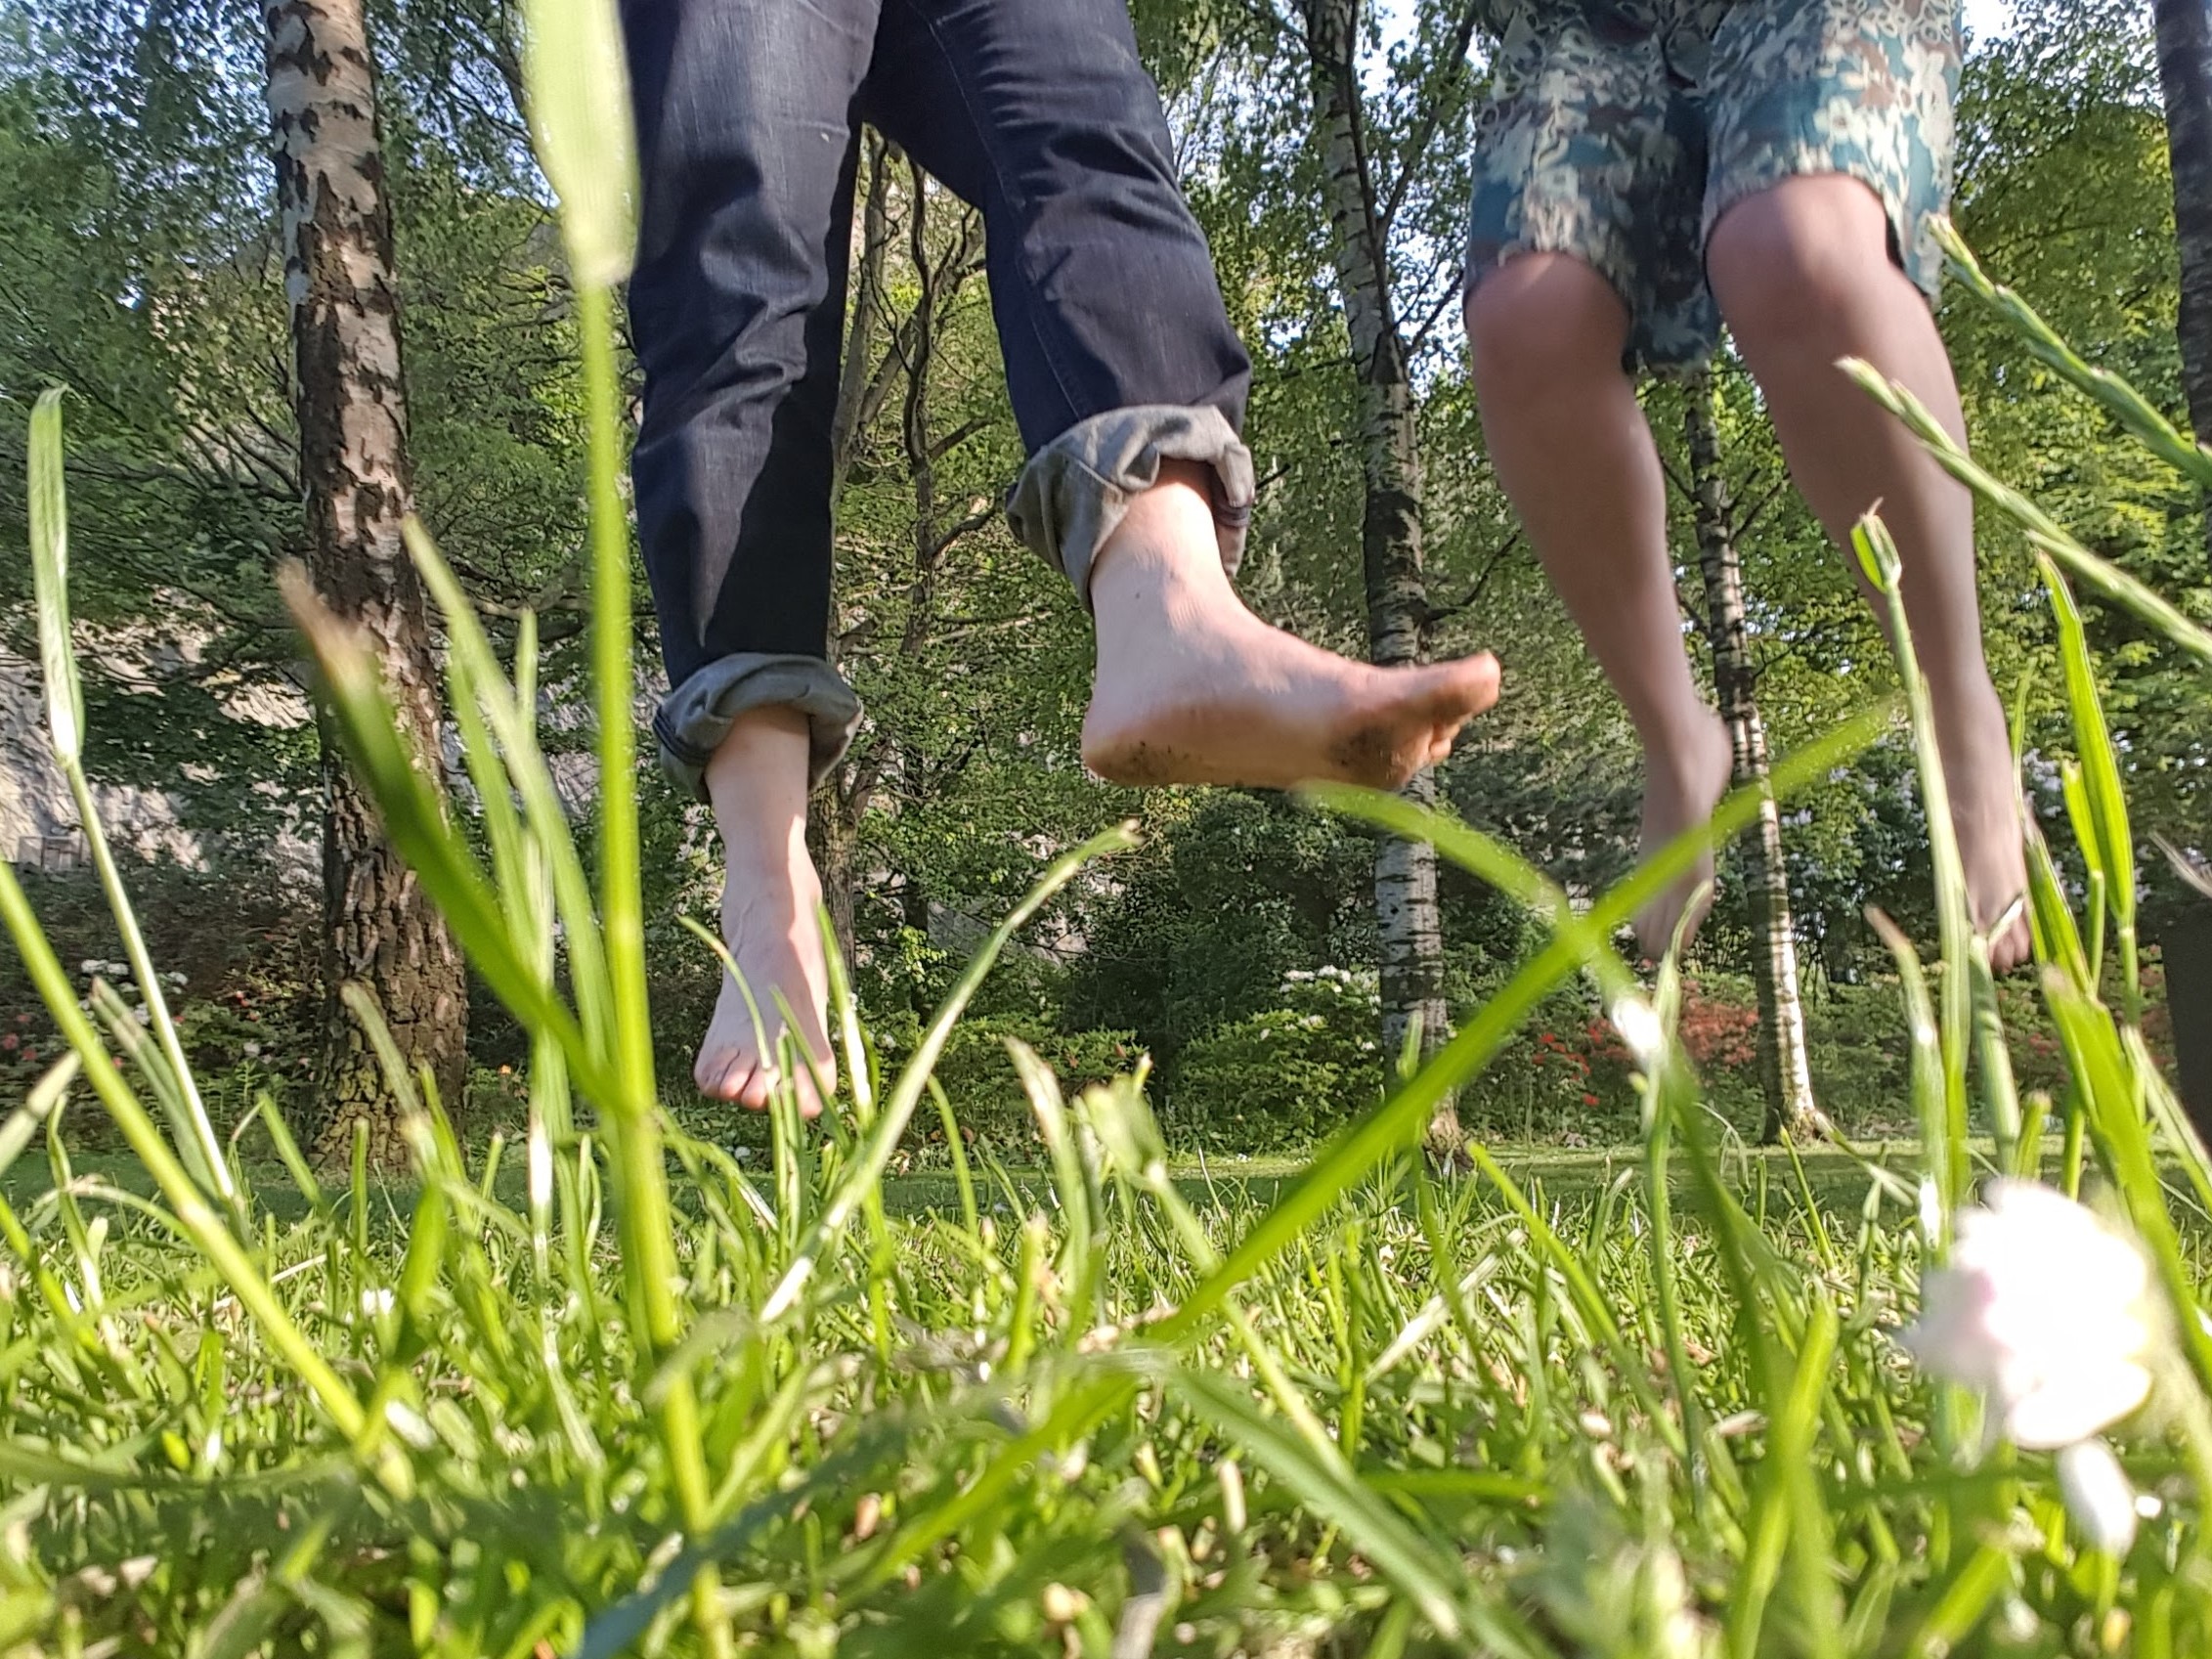 Feet jumping up and down in a field 